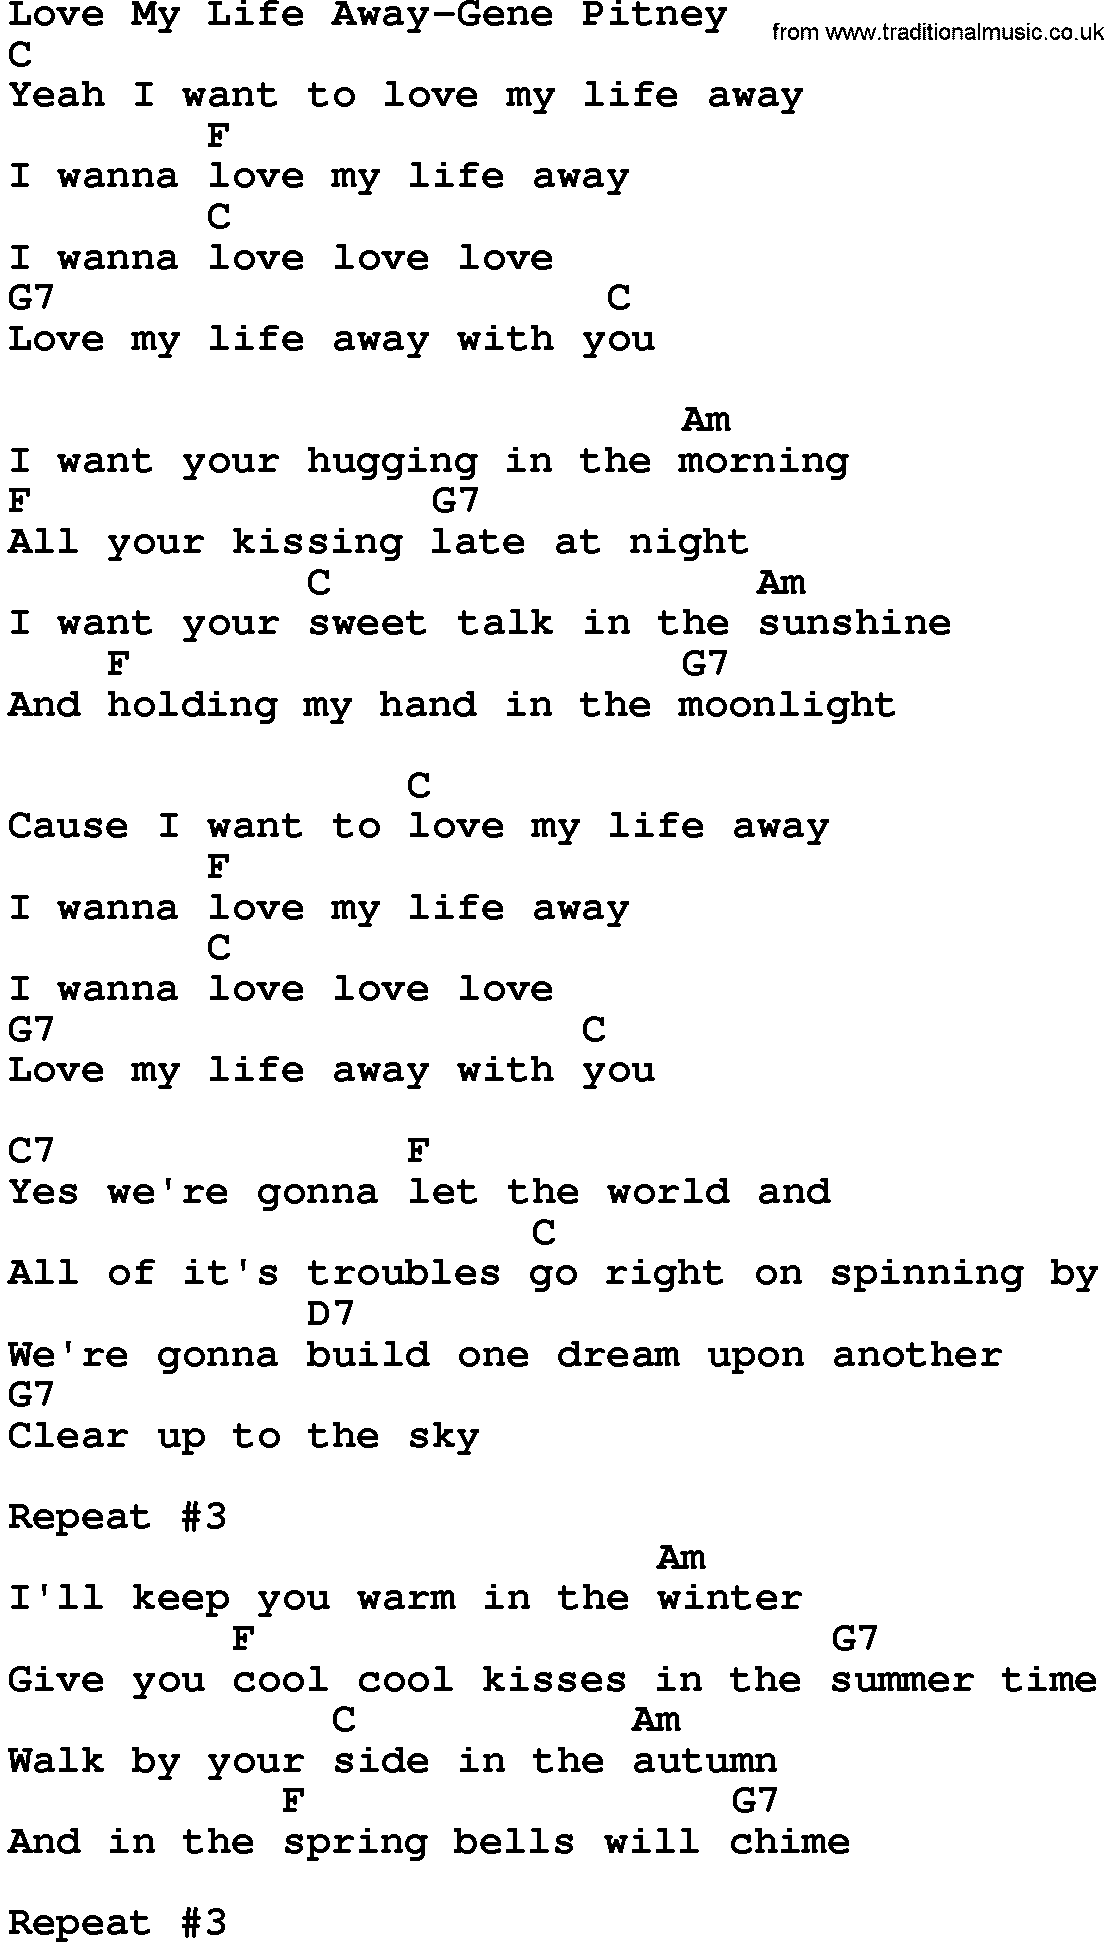 Country music song: Love My Life Away-Gene Pitney lyrics and chords